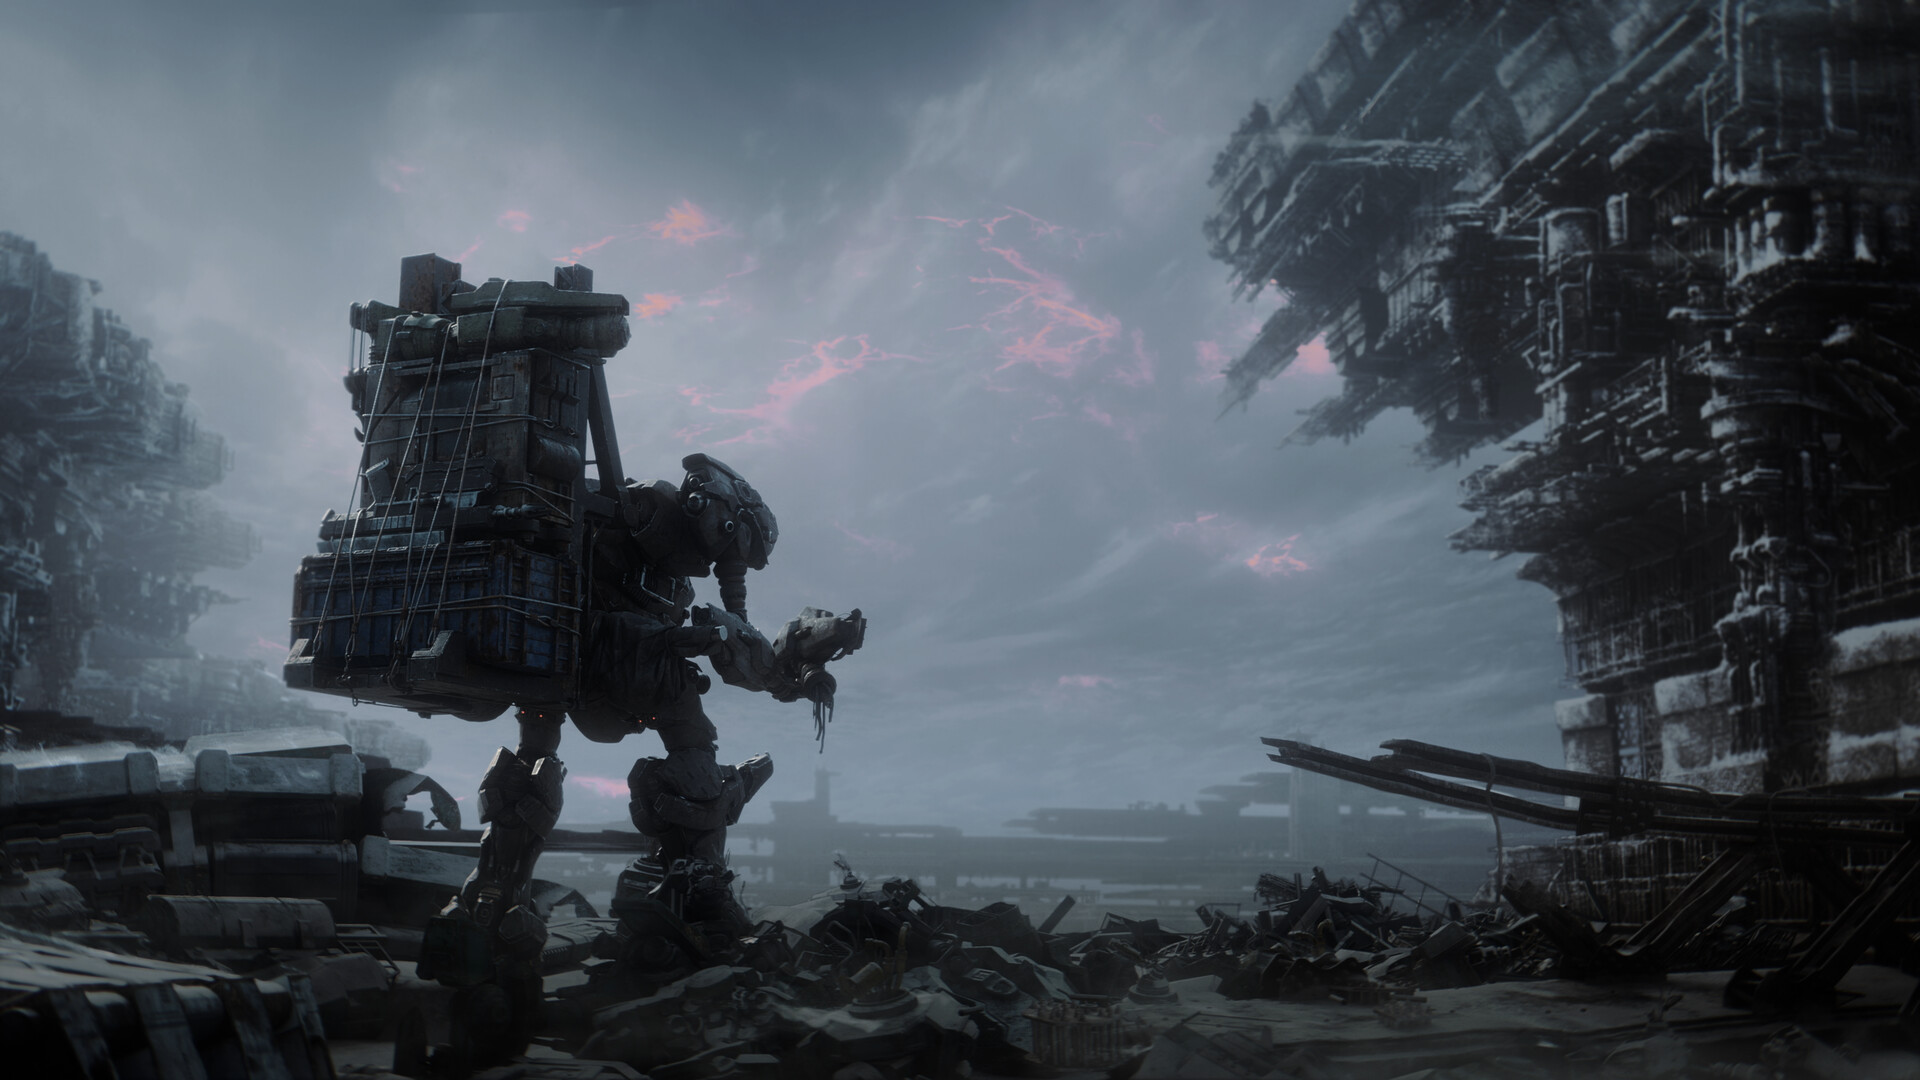 FromSoftware have released the Armored Core 6 gameplay trailer and release date information.